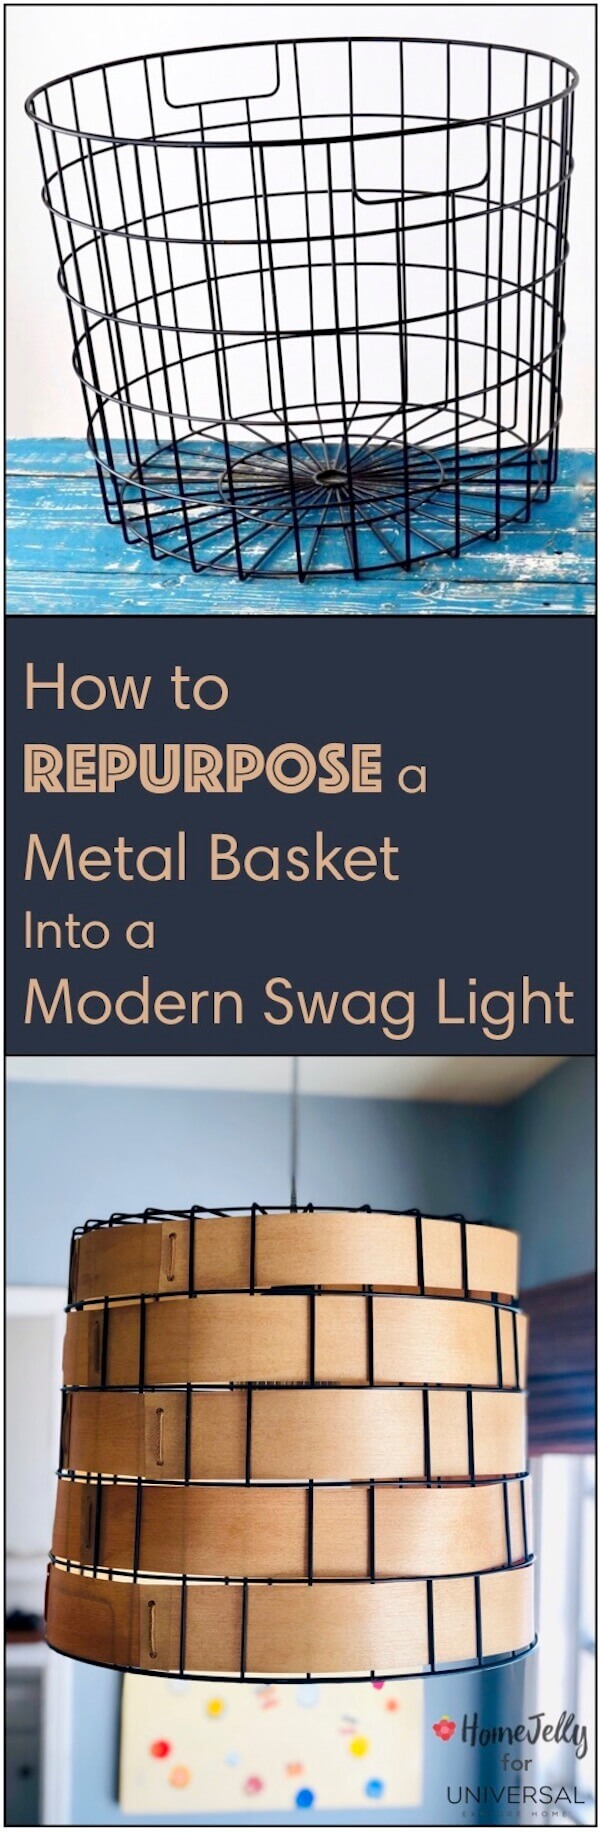 How to repurpose a metal basket into a modern swag light